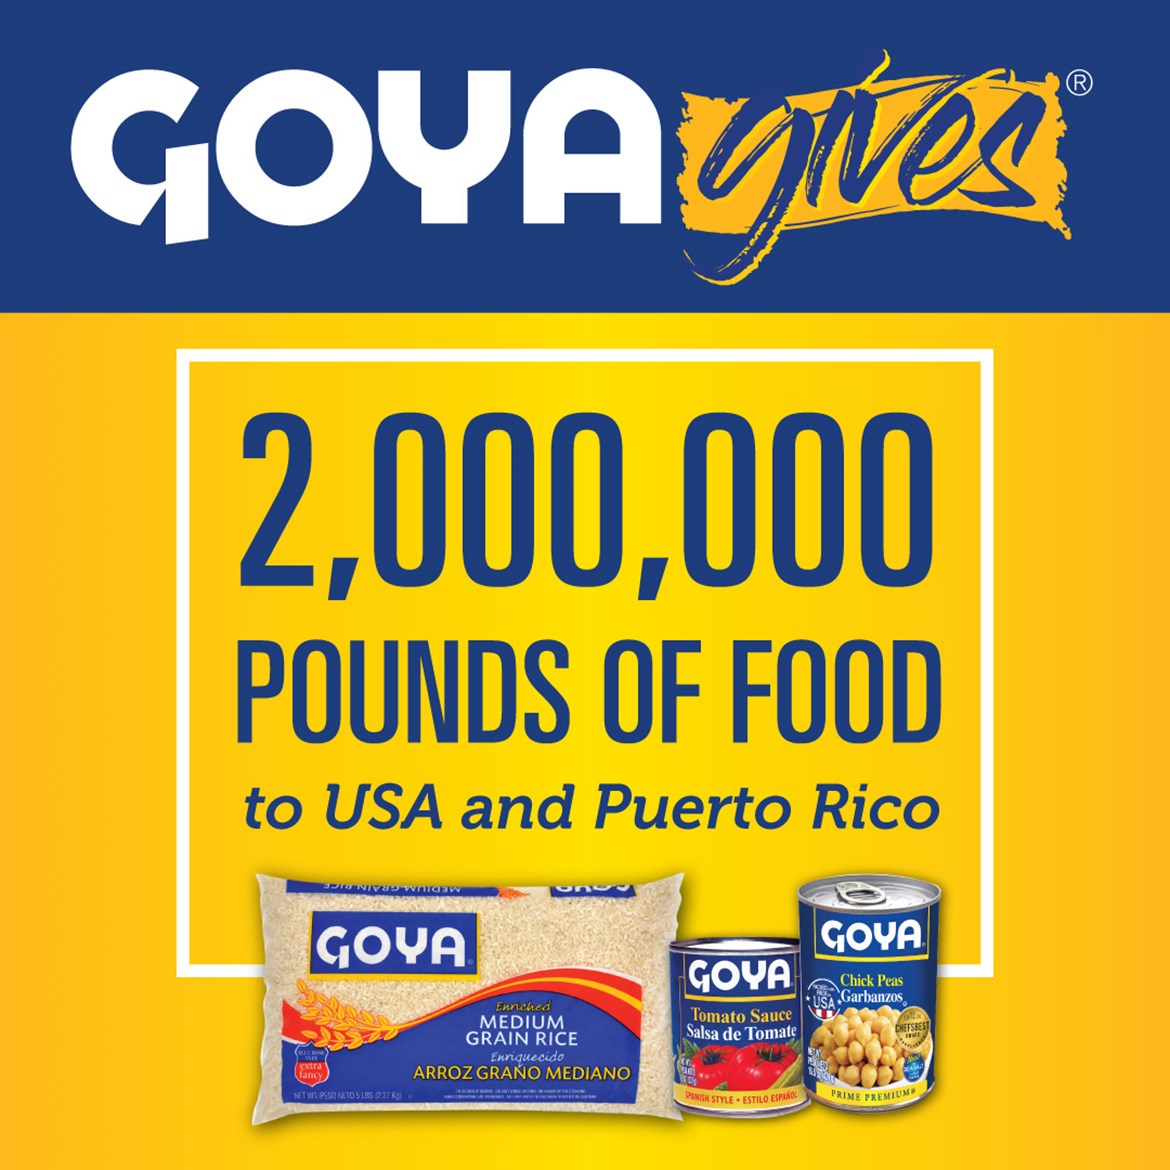 Press Release: GOYA INITIATES CRITICAL DISTRIBUTION  OF TWO MILLION POUNDS OF FOOD  ACROSS THE UNITED STATES AND PUERTO RICO Working for Our Country #GoyaGives 